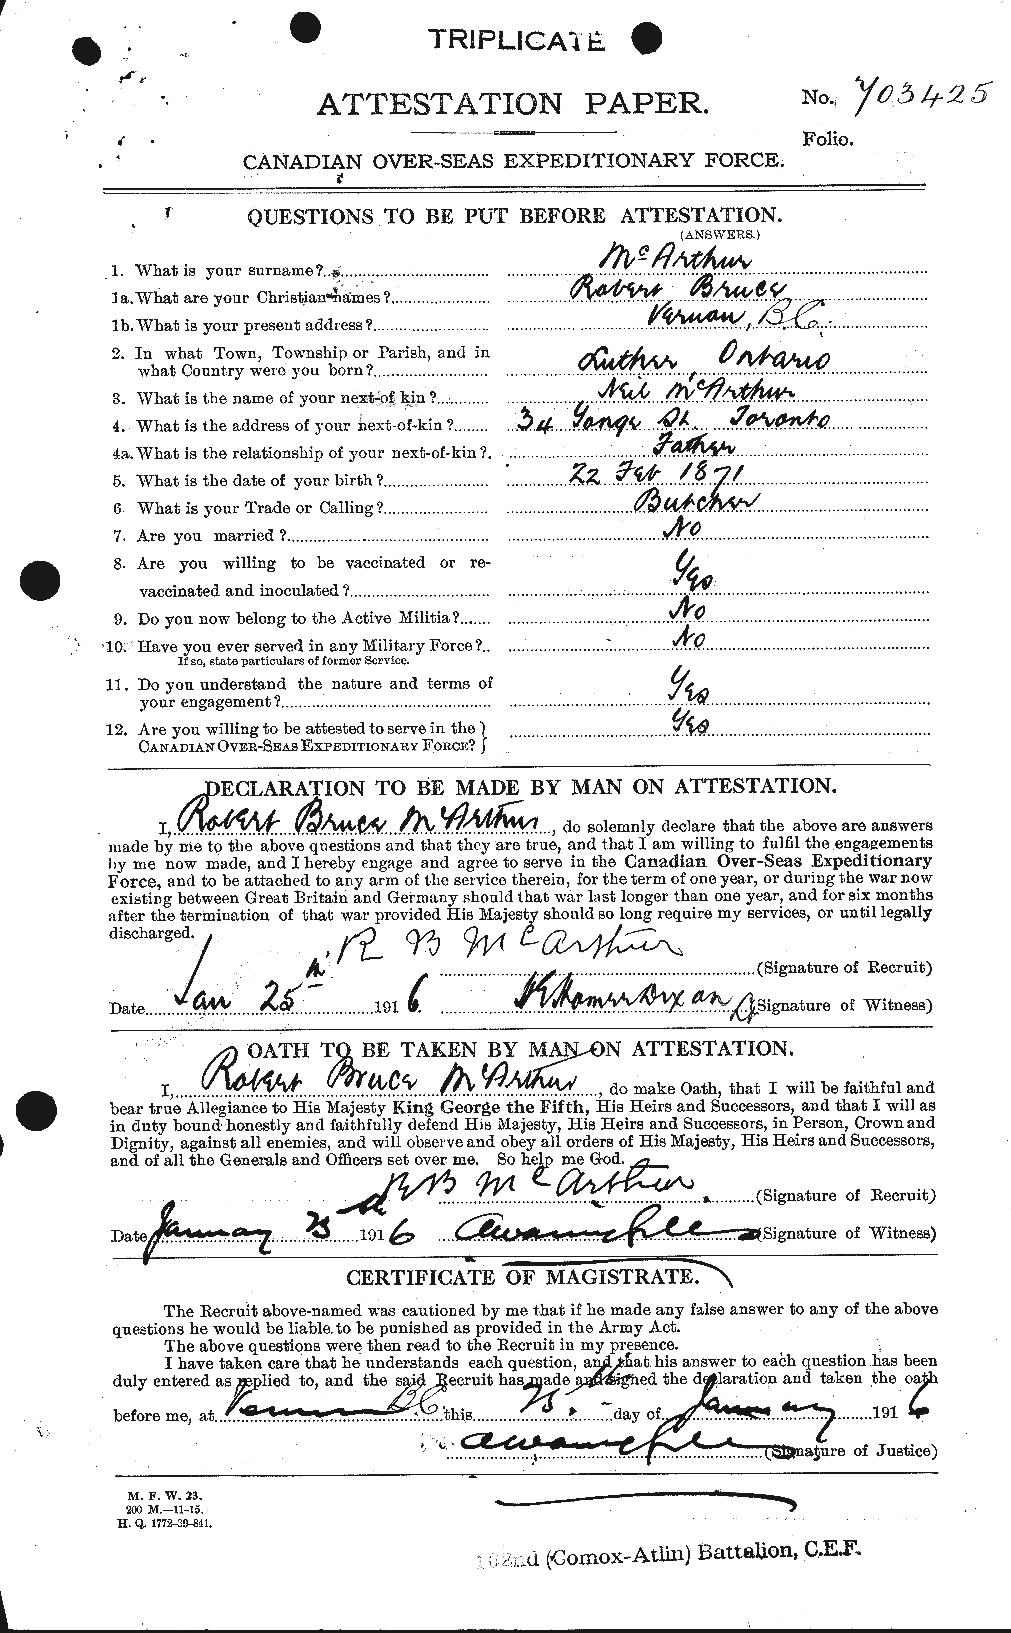 Personnel Records of the First World War - CEF 130663a